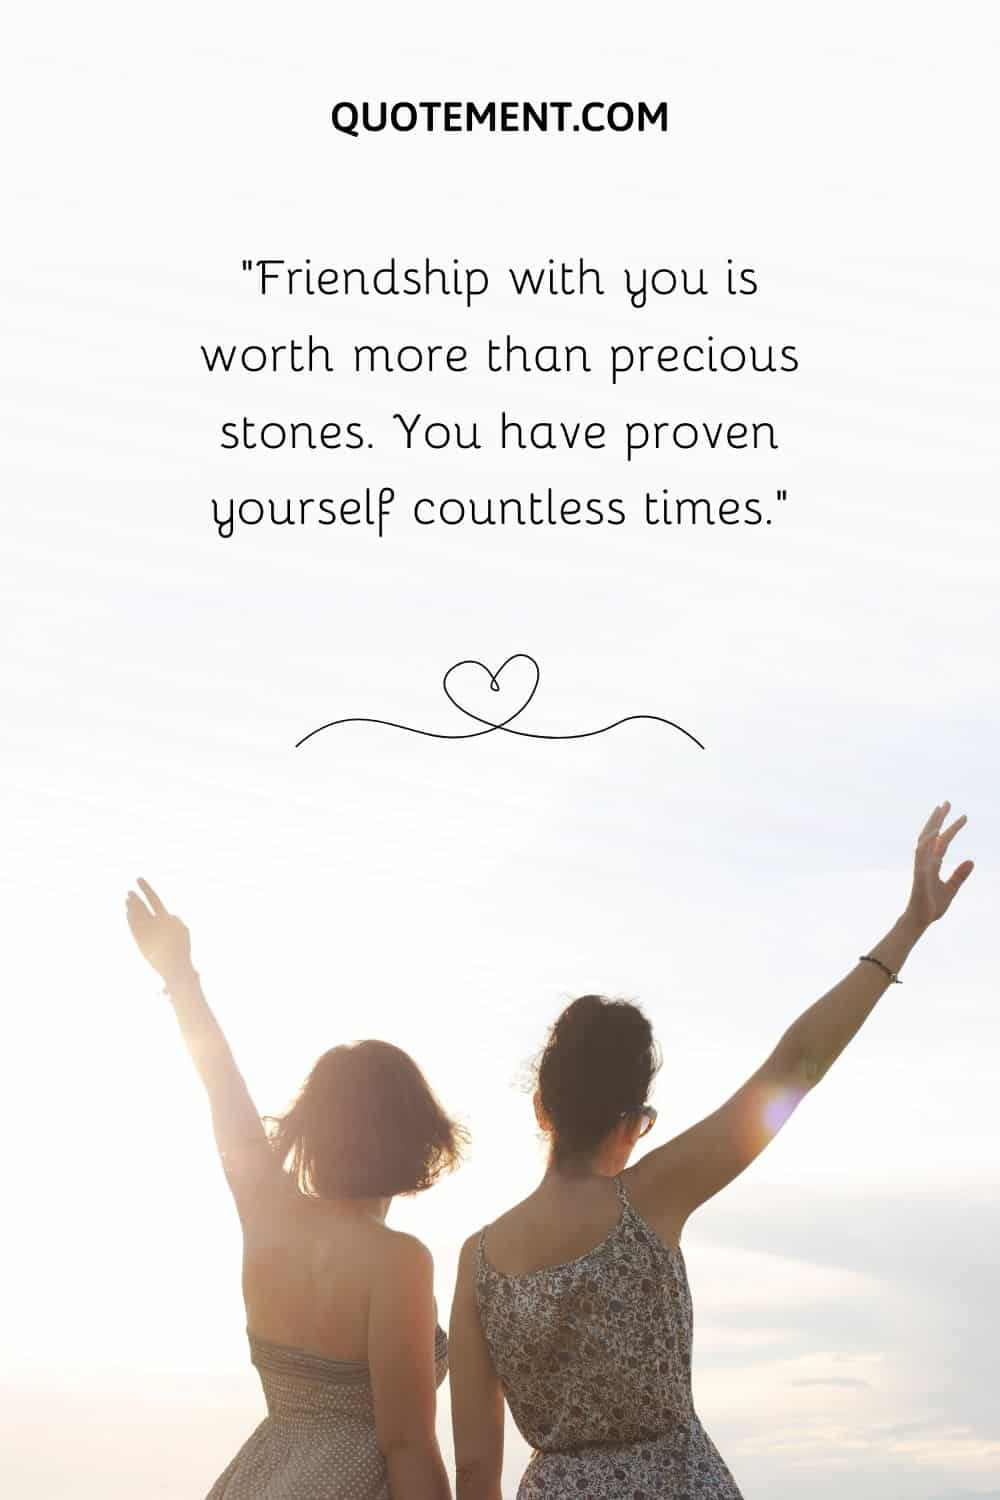 Friendship with you is worth more than precious stones.